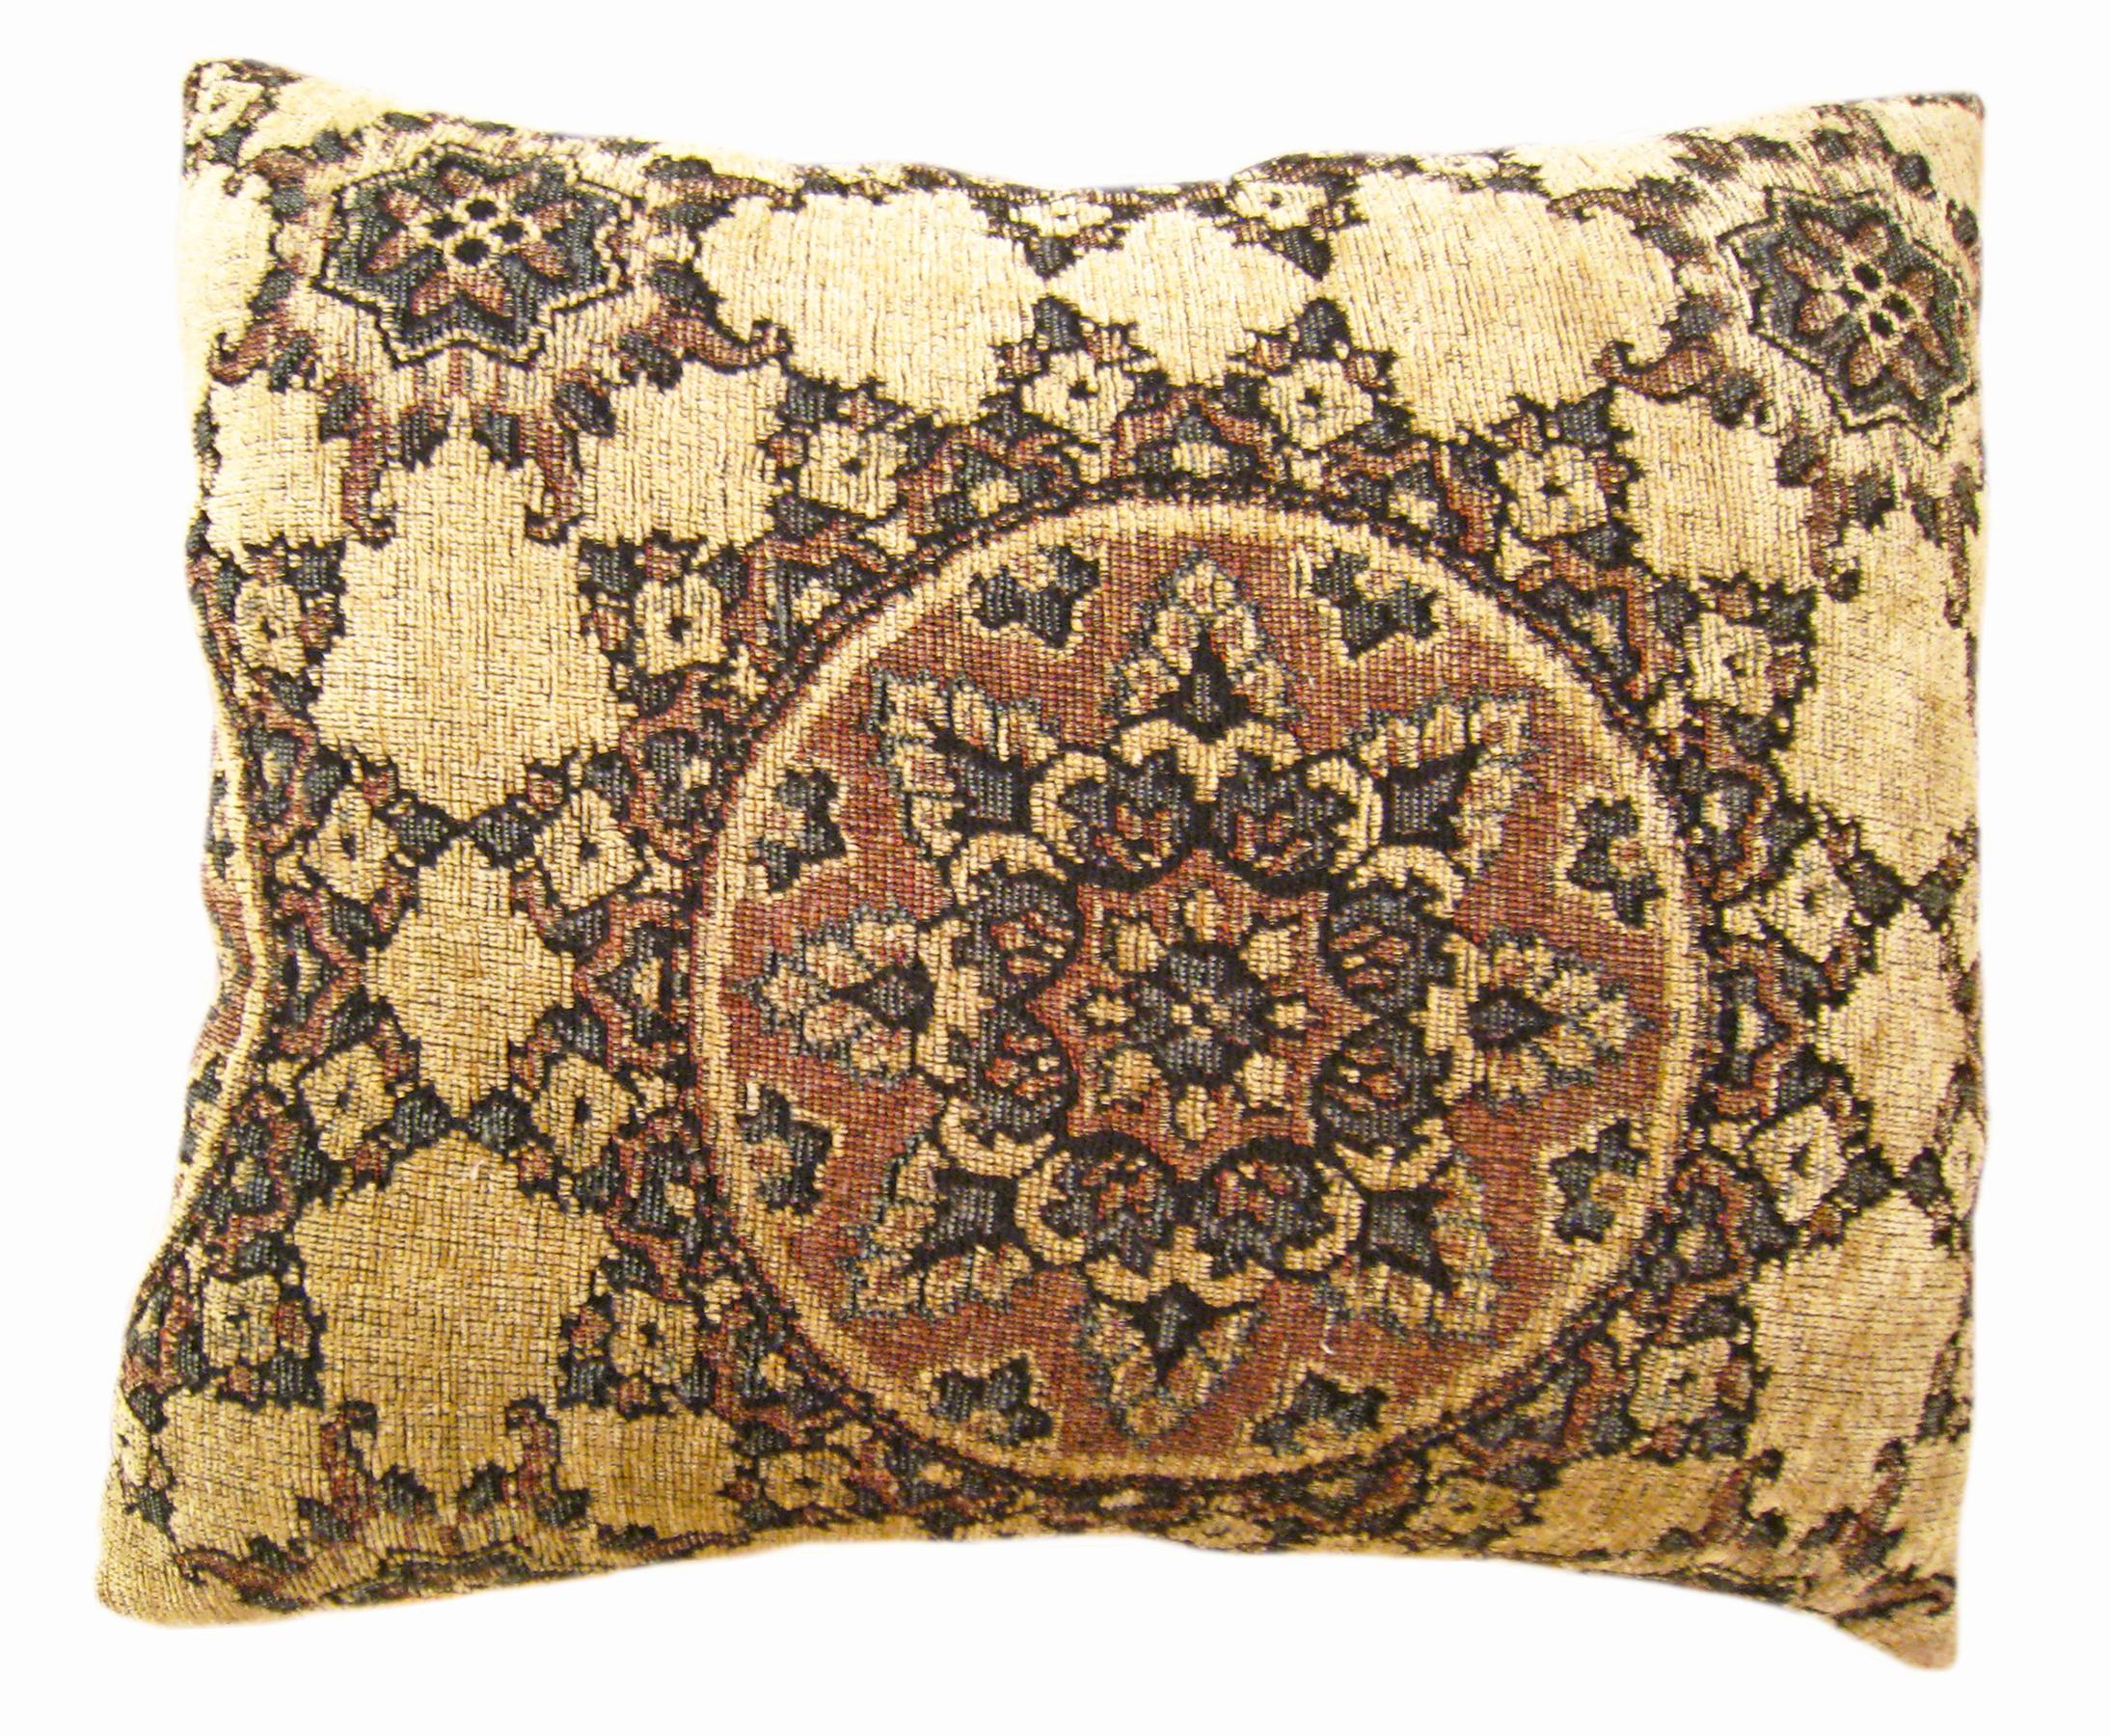 Vintage American Taperstry Circle rug pillow ; size 20” x 18”.

A vintage decorative pillow with circles design motif in a brown central field, size 20” x 18”. This lovely decorative pillow features an antique rug on front which is characterized